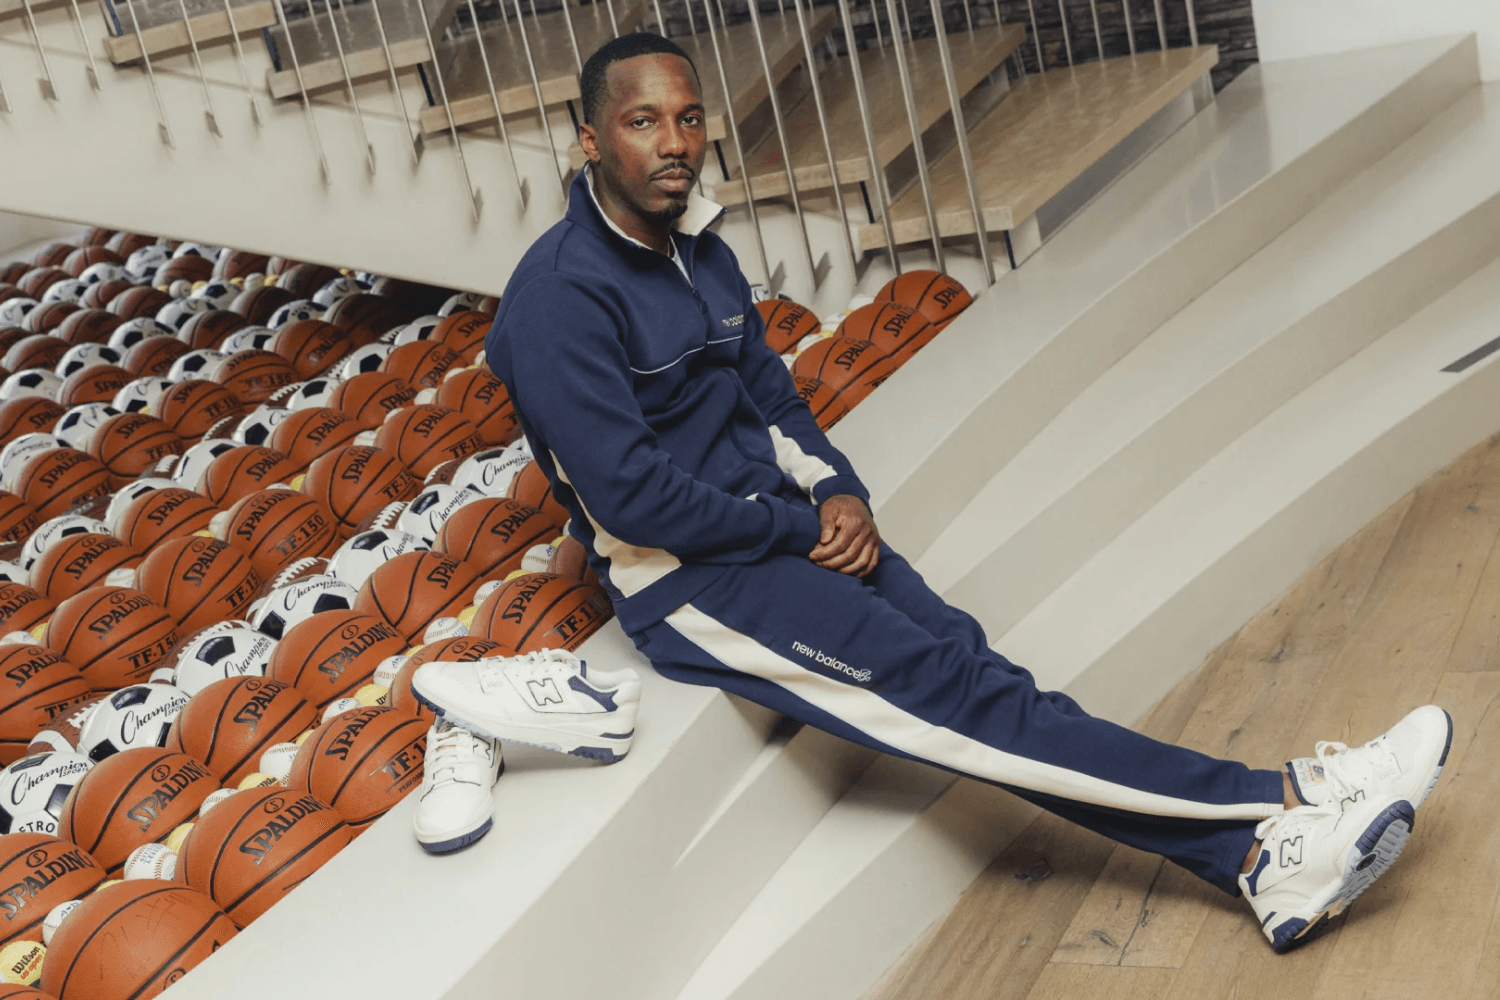 Rich Paul tells the story behind his New Balance 550